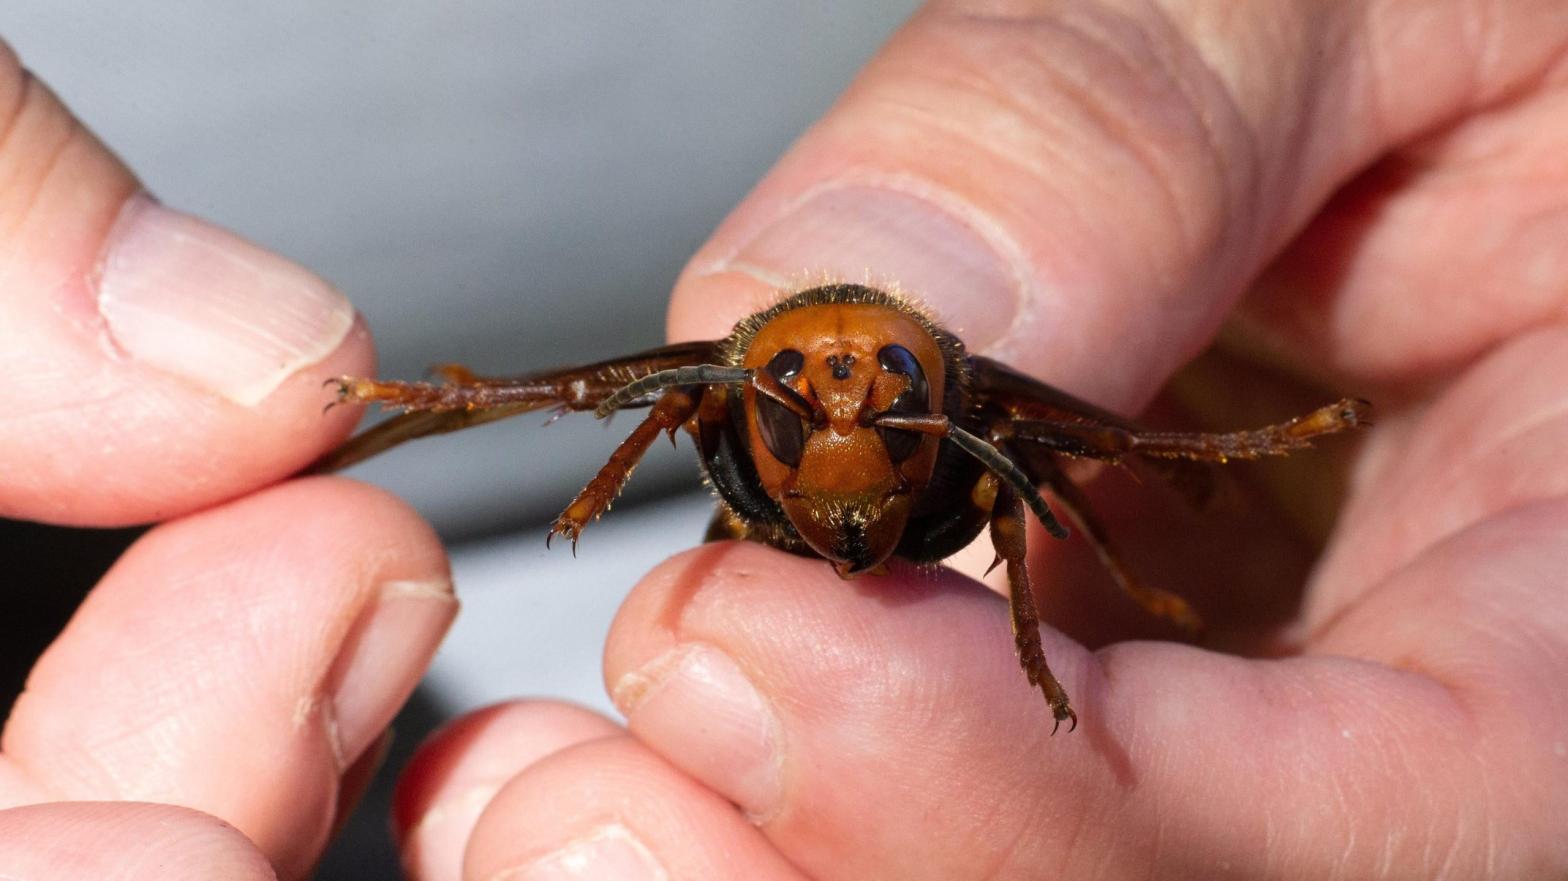 A sample specimen of a dead Asian Giant Hornet from Japan, also known as a murder hornet, is held by a pest biologist from the Washington State Department of Agriculture on July 29, 2020 in Bellingham, Washington. (Photo: Karen Ducey, Getty Images)